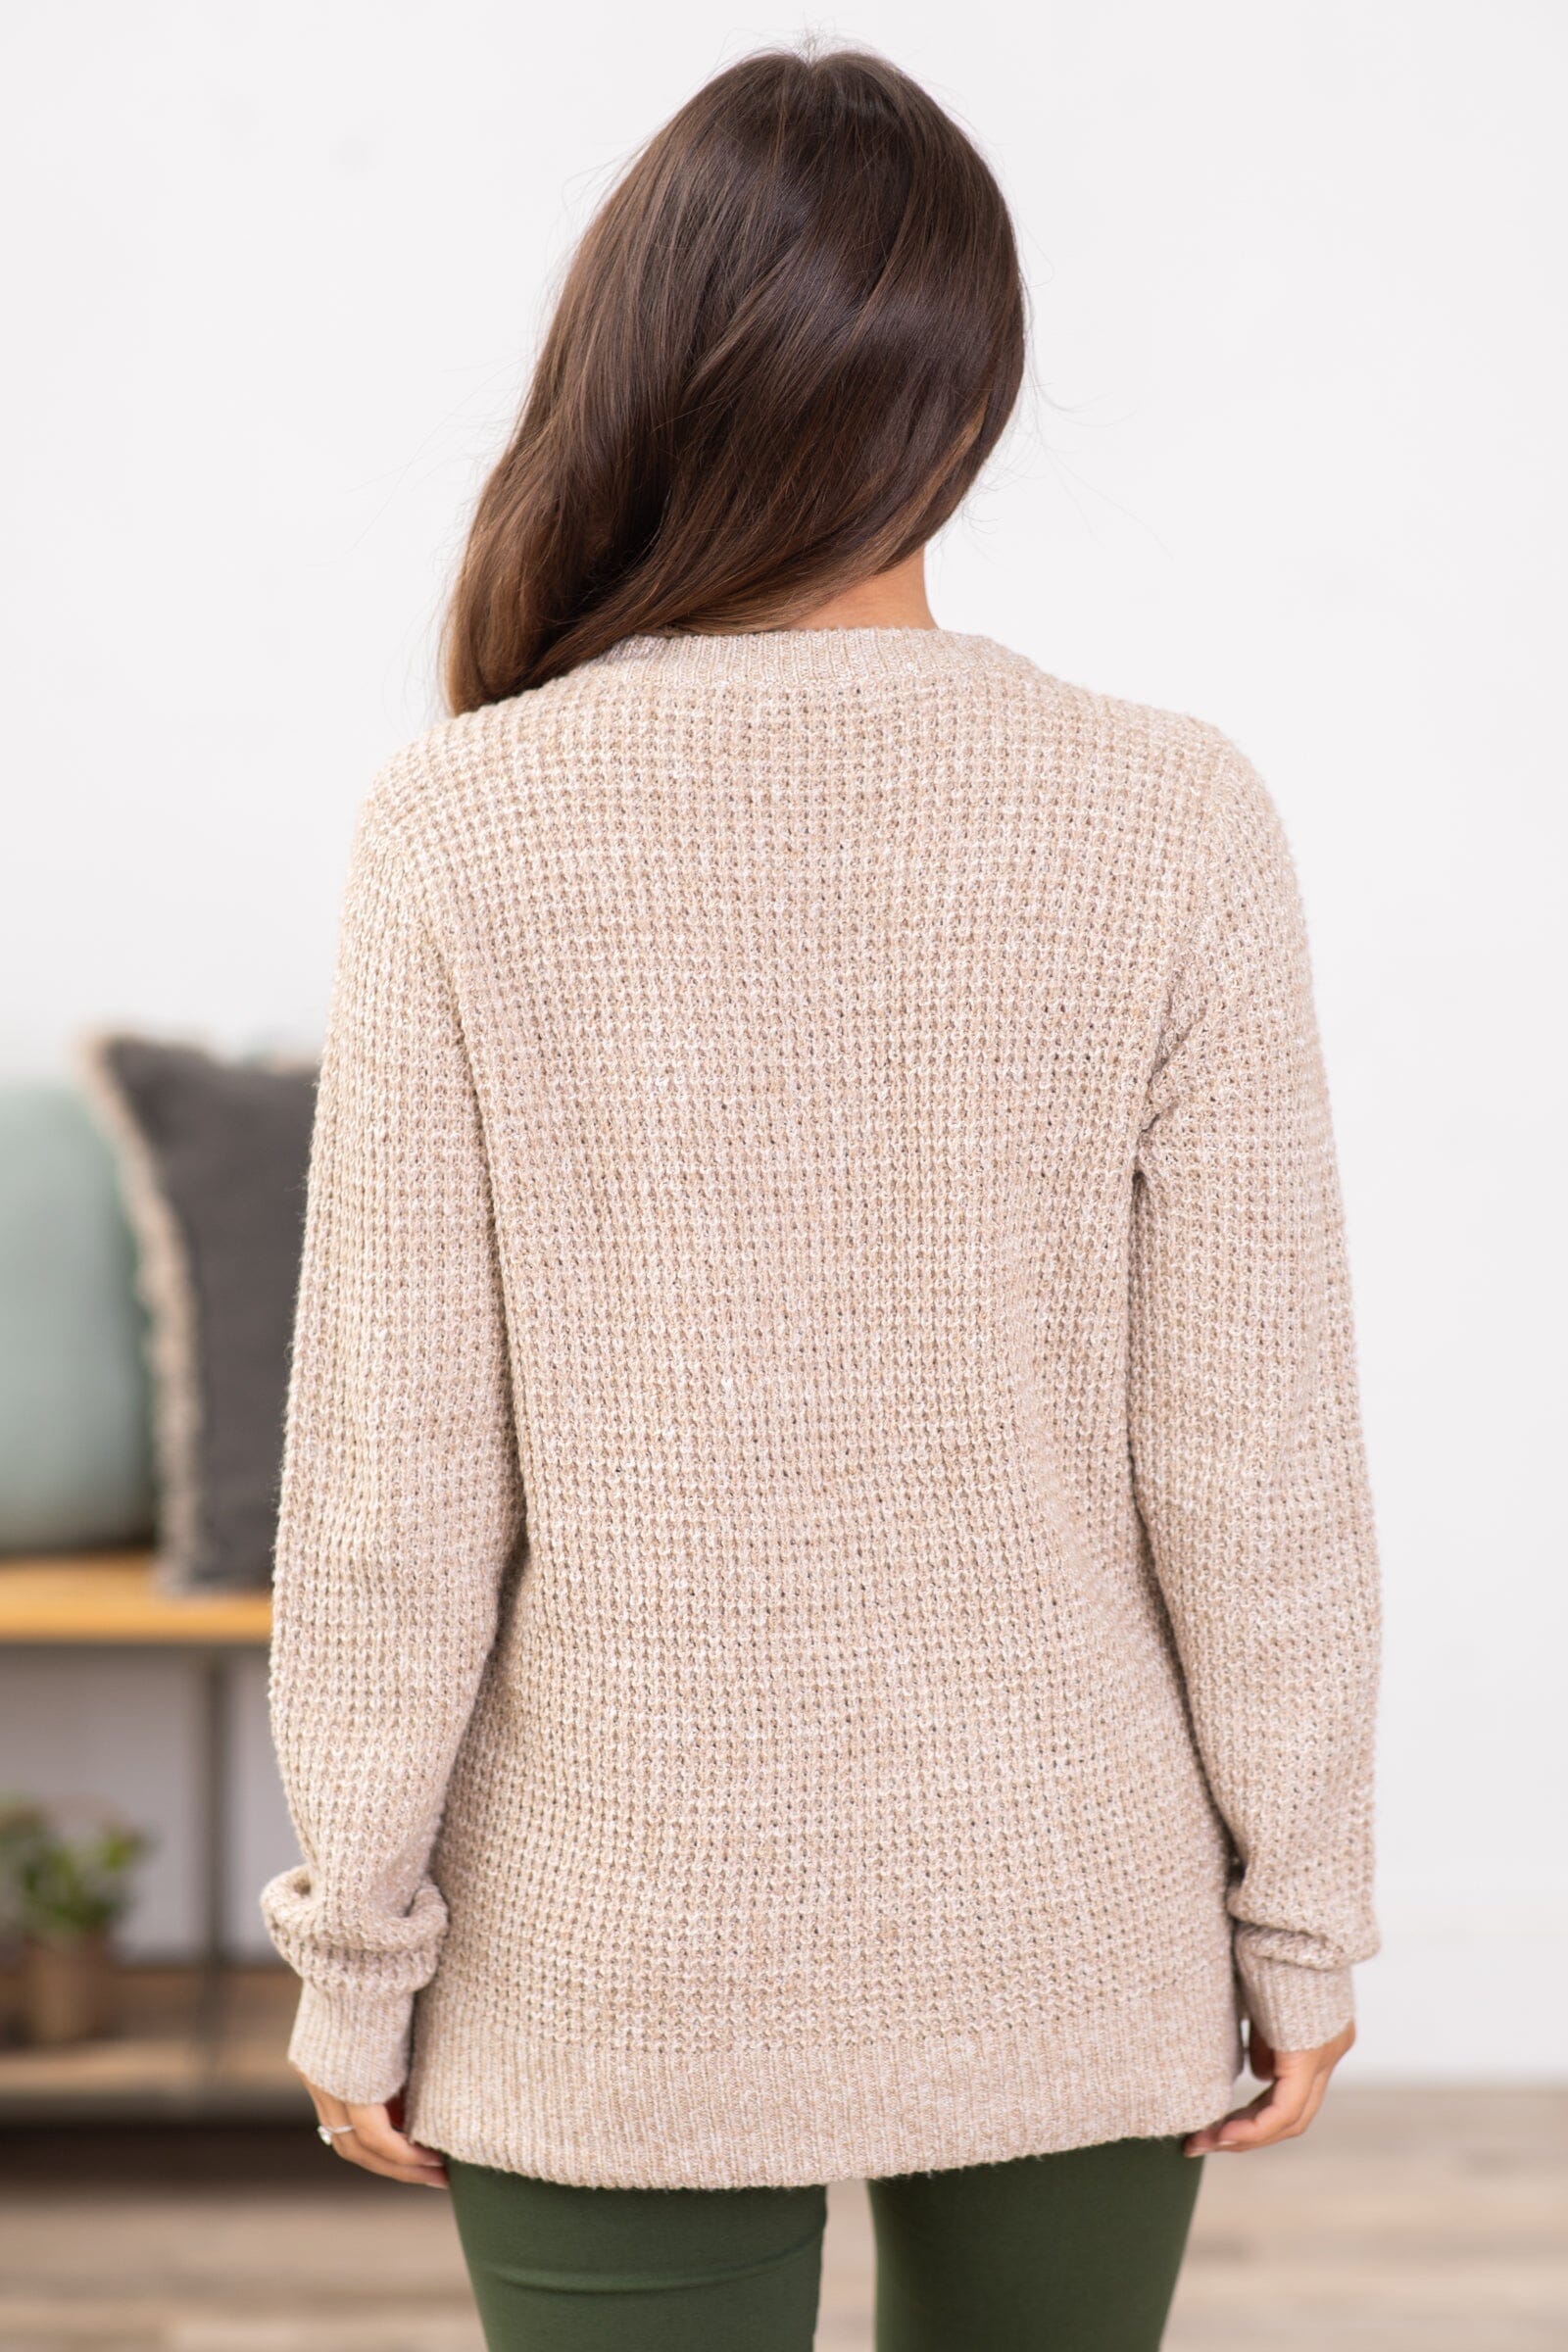 Tan Waffle Knit Round Neck Sweater - Filly Flair